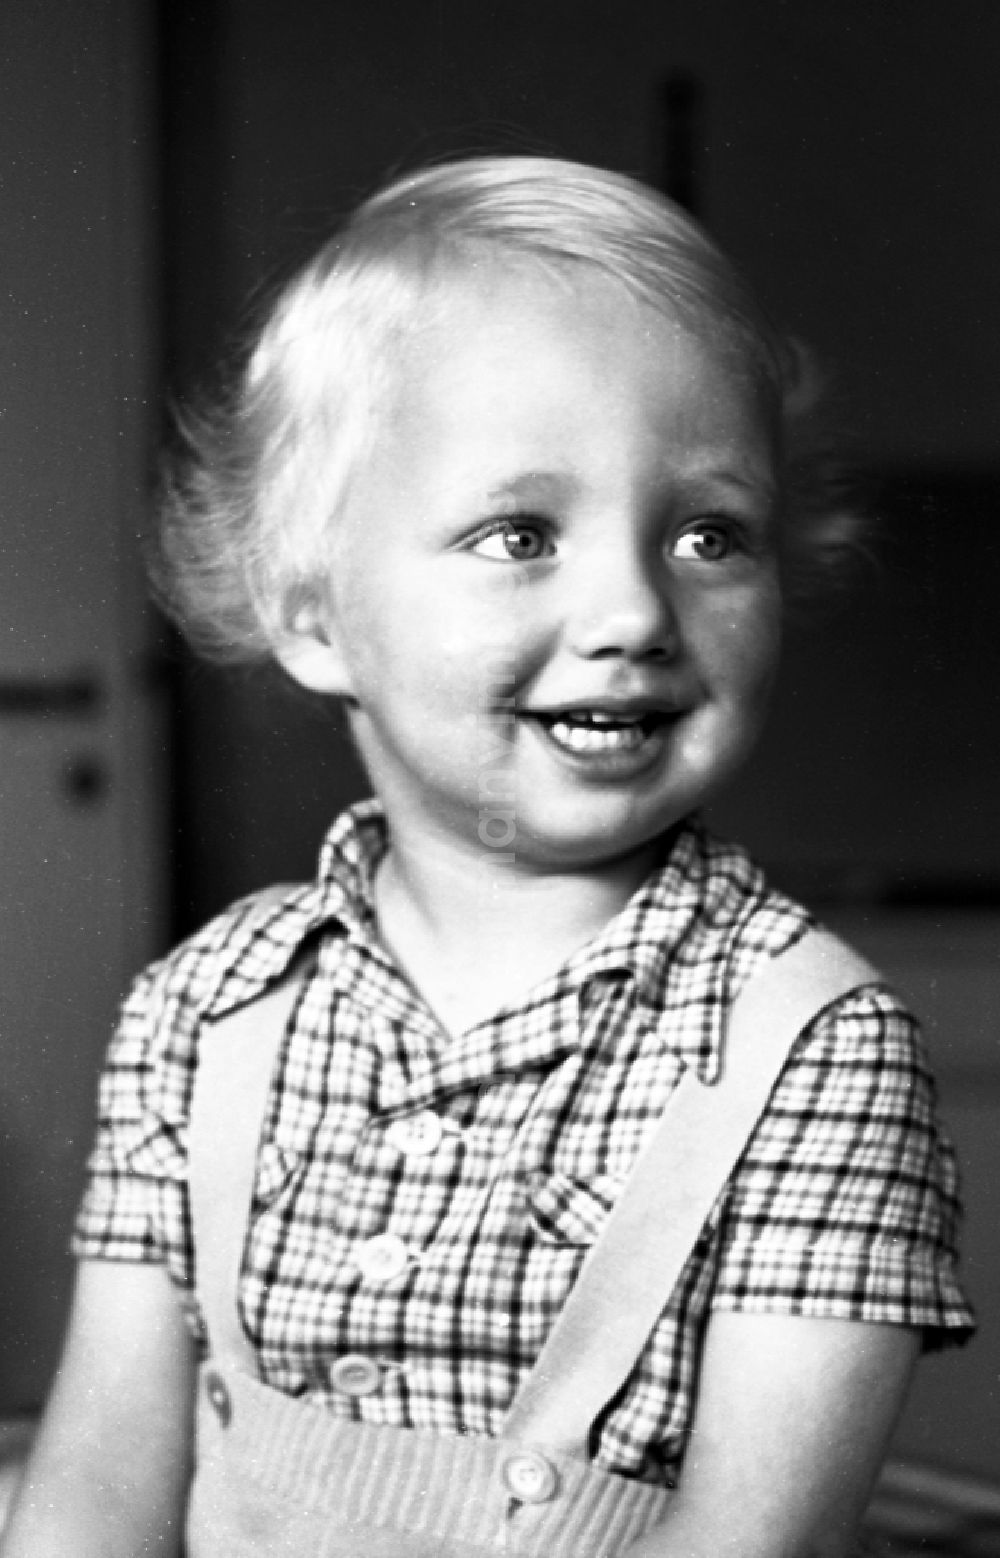 GDR photo archive: Merseburg - A small boy in the portrait in Merseburg in the federal state Saxony-Anhalt in Germany